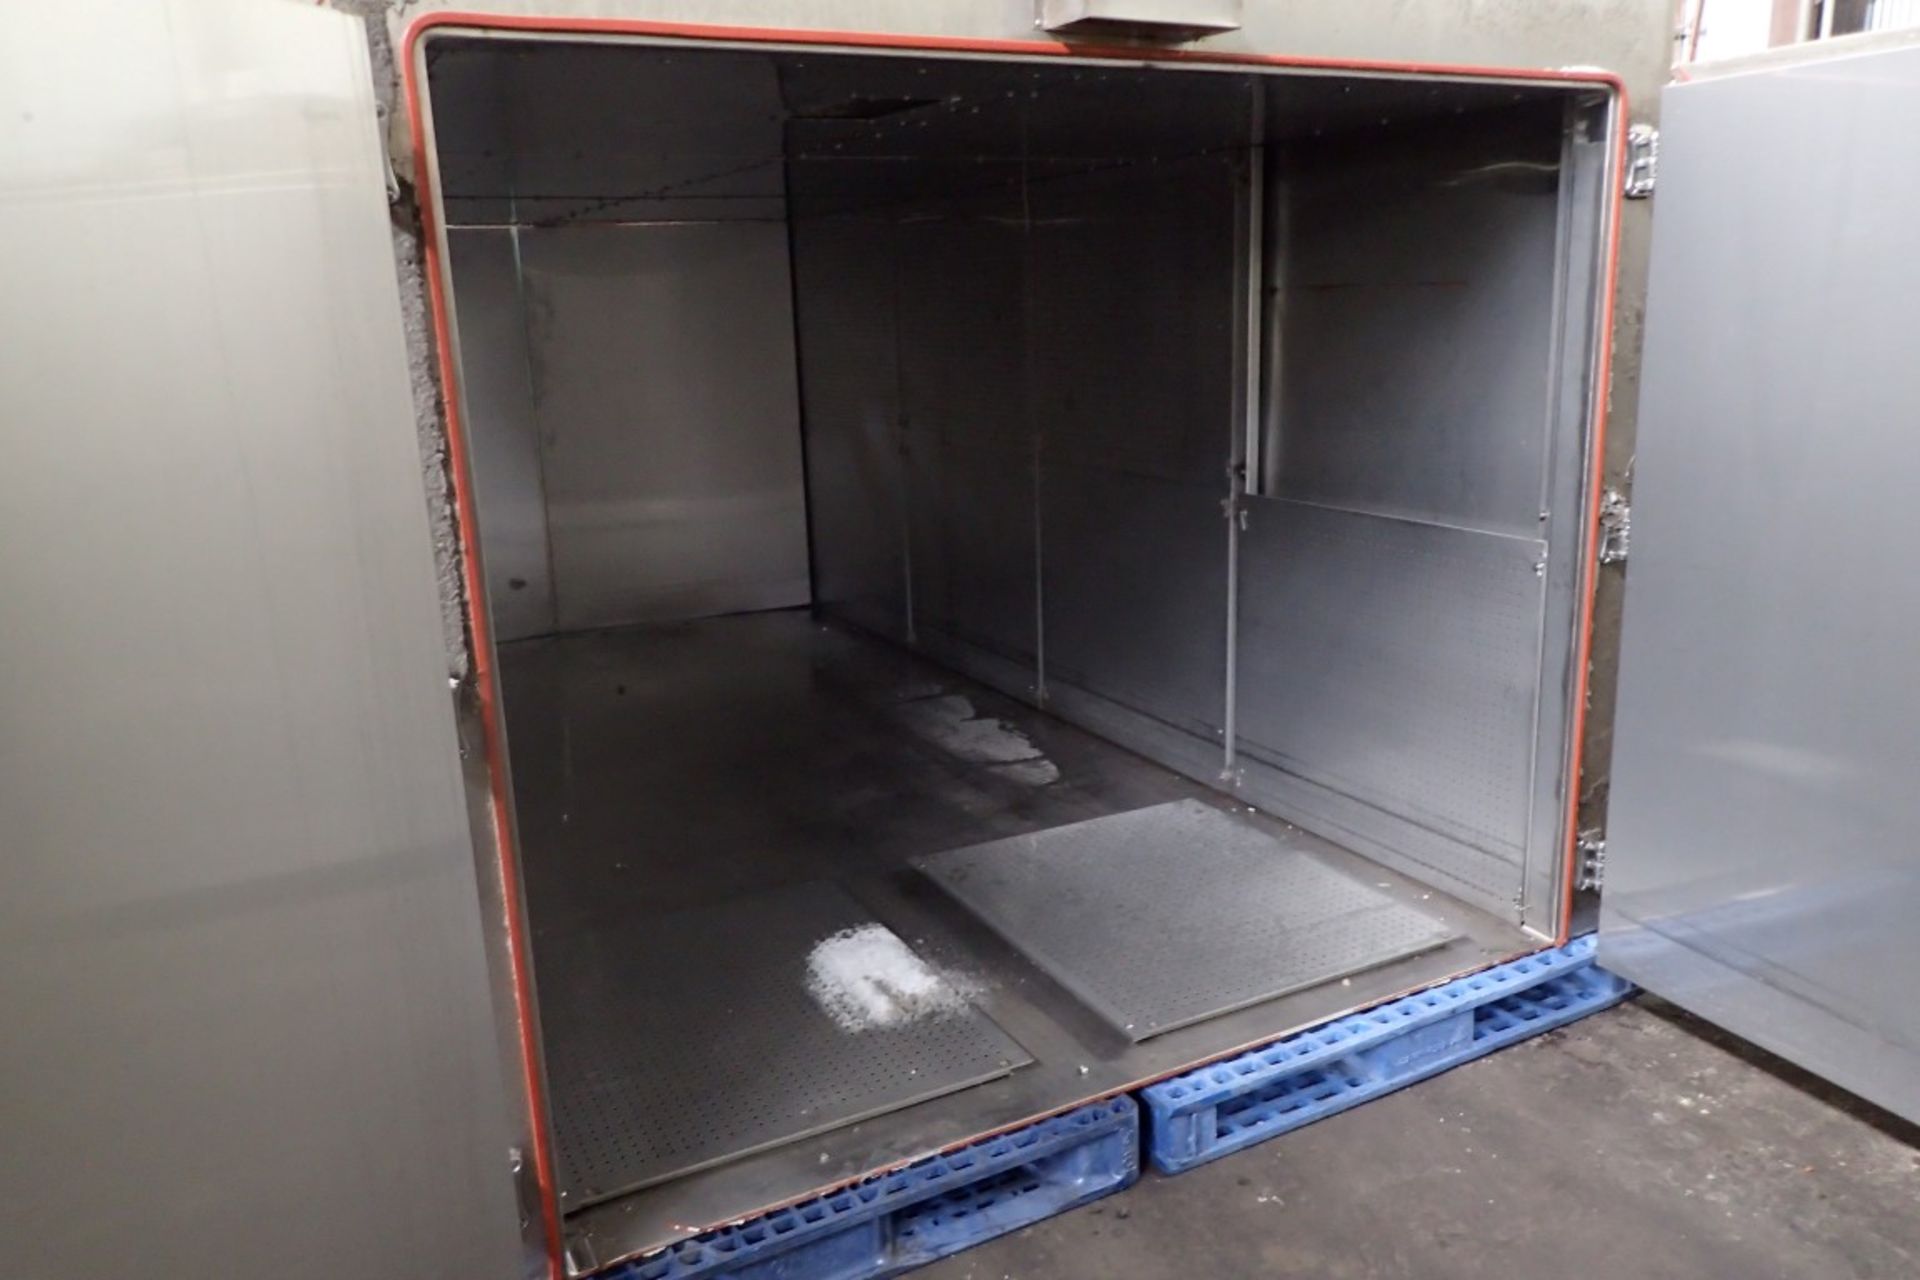 Despatch Pass Thru Cart Oven, Model GWB*78X150X50, Stainless Steel Construction. - Image 7 of 10